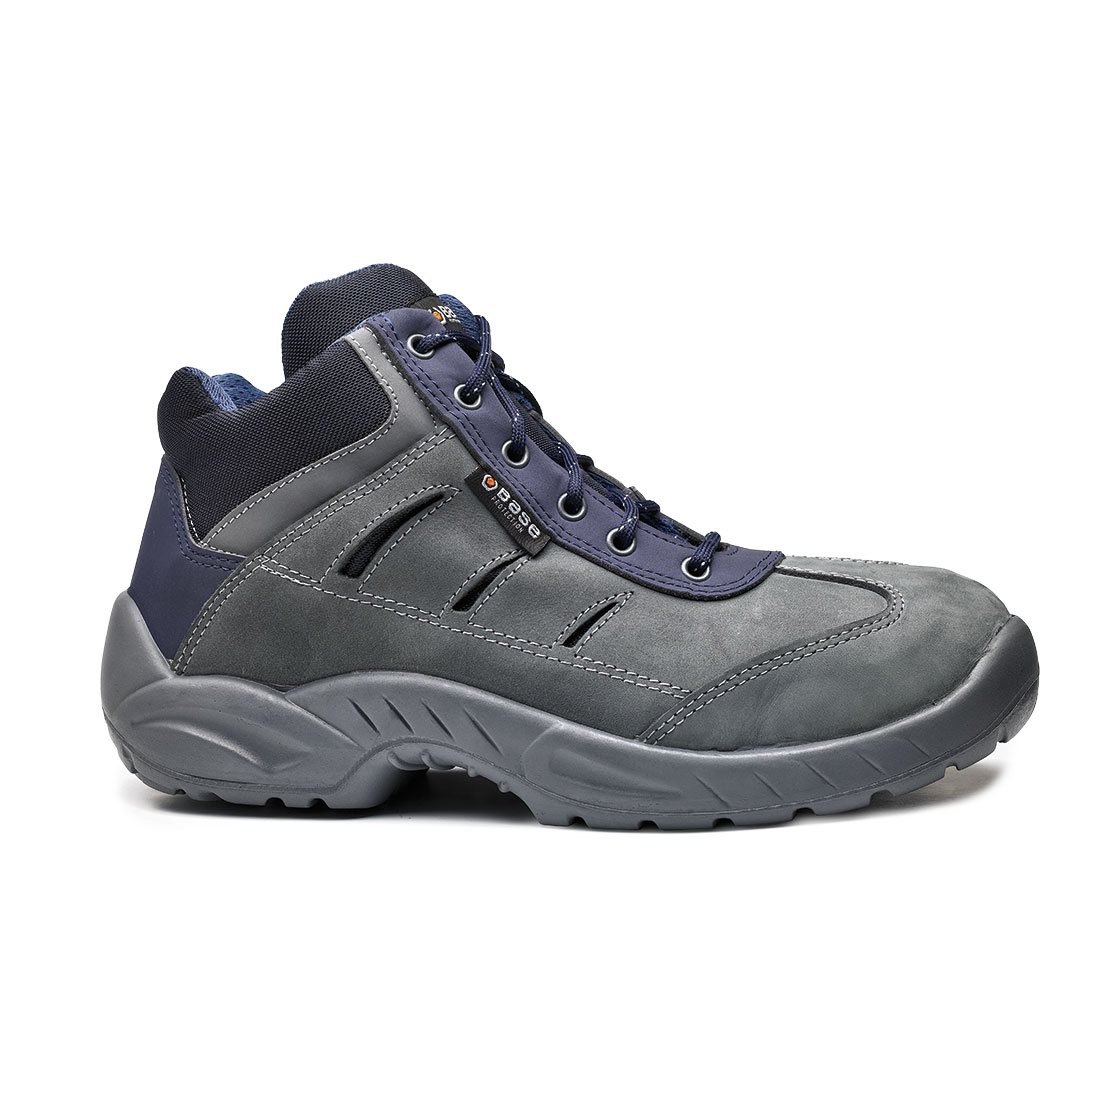 Base Greenwich Ankle Shoes Grey/Cobalt B0169